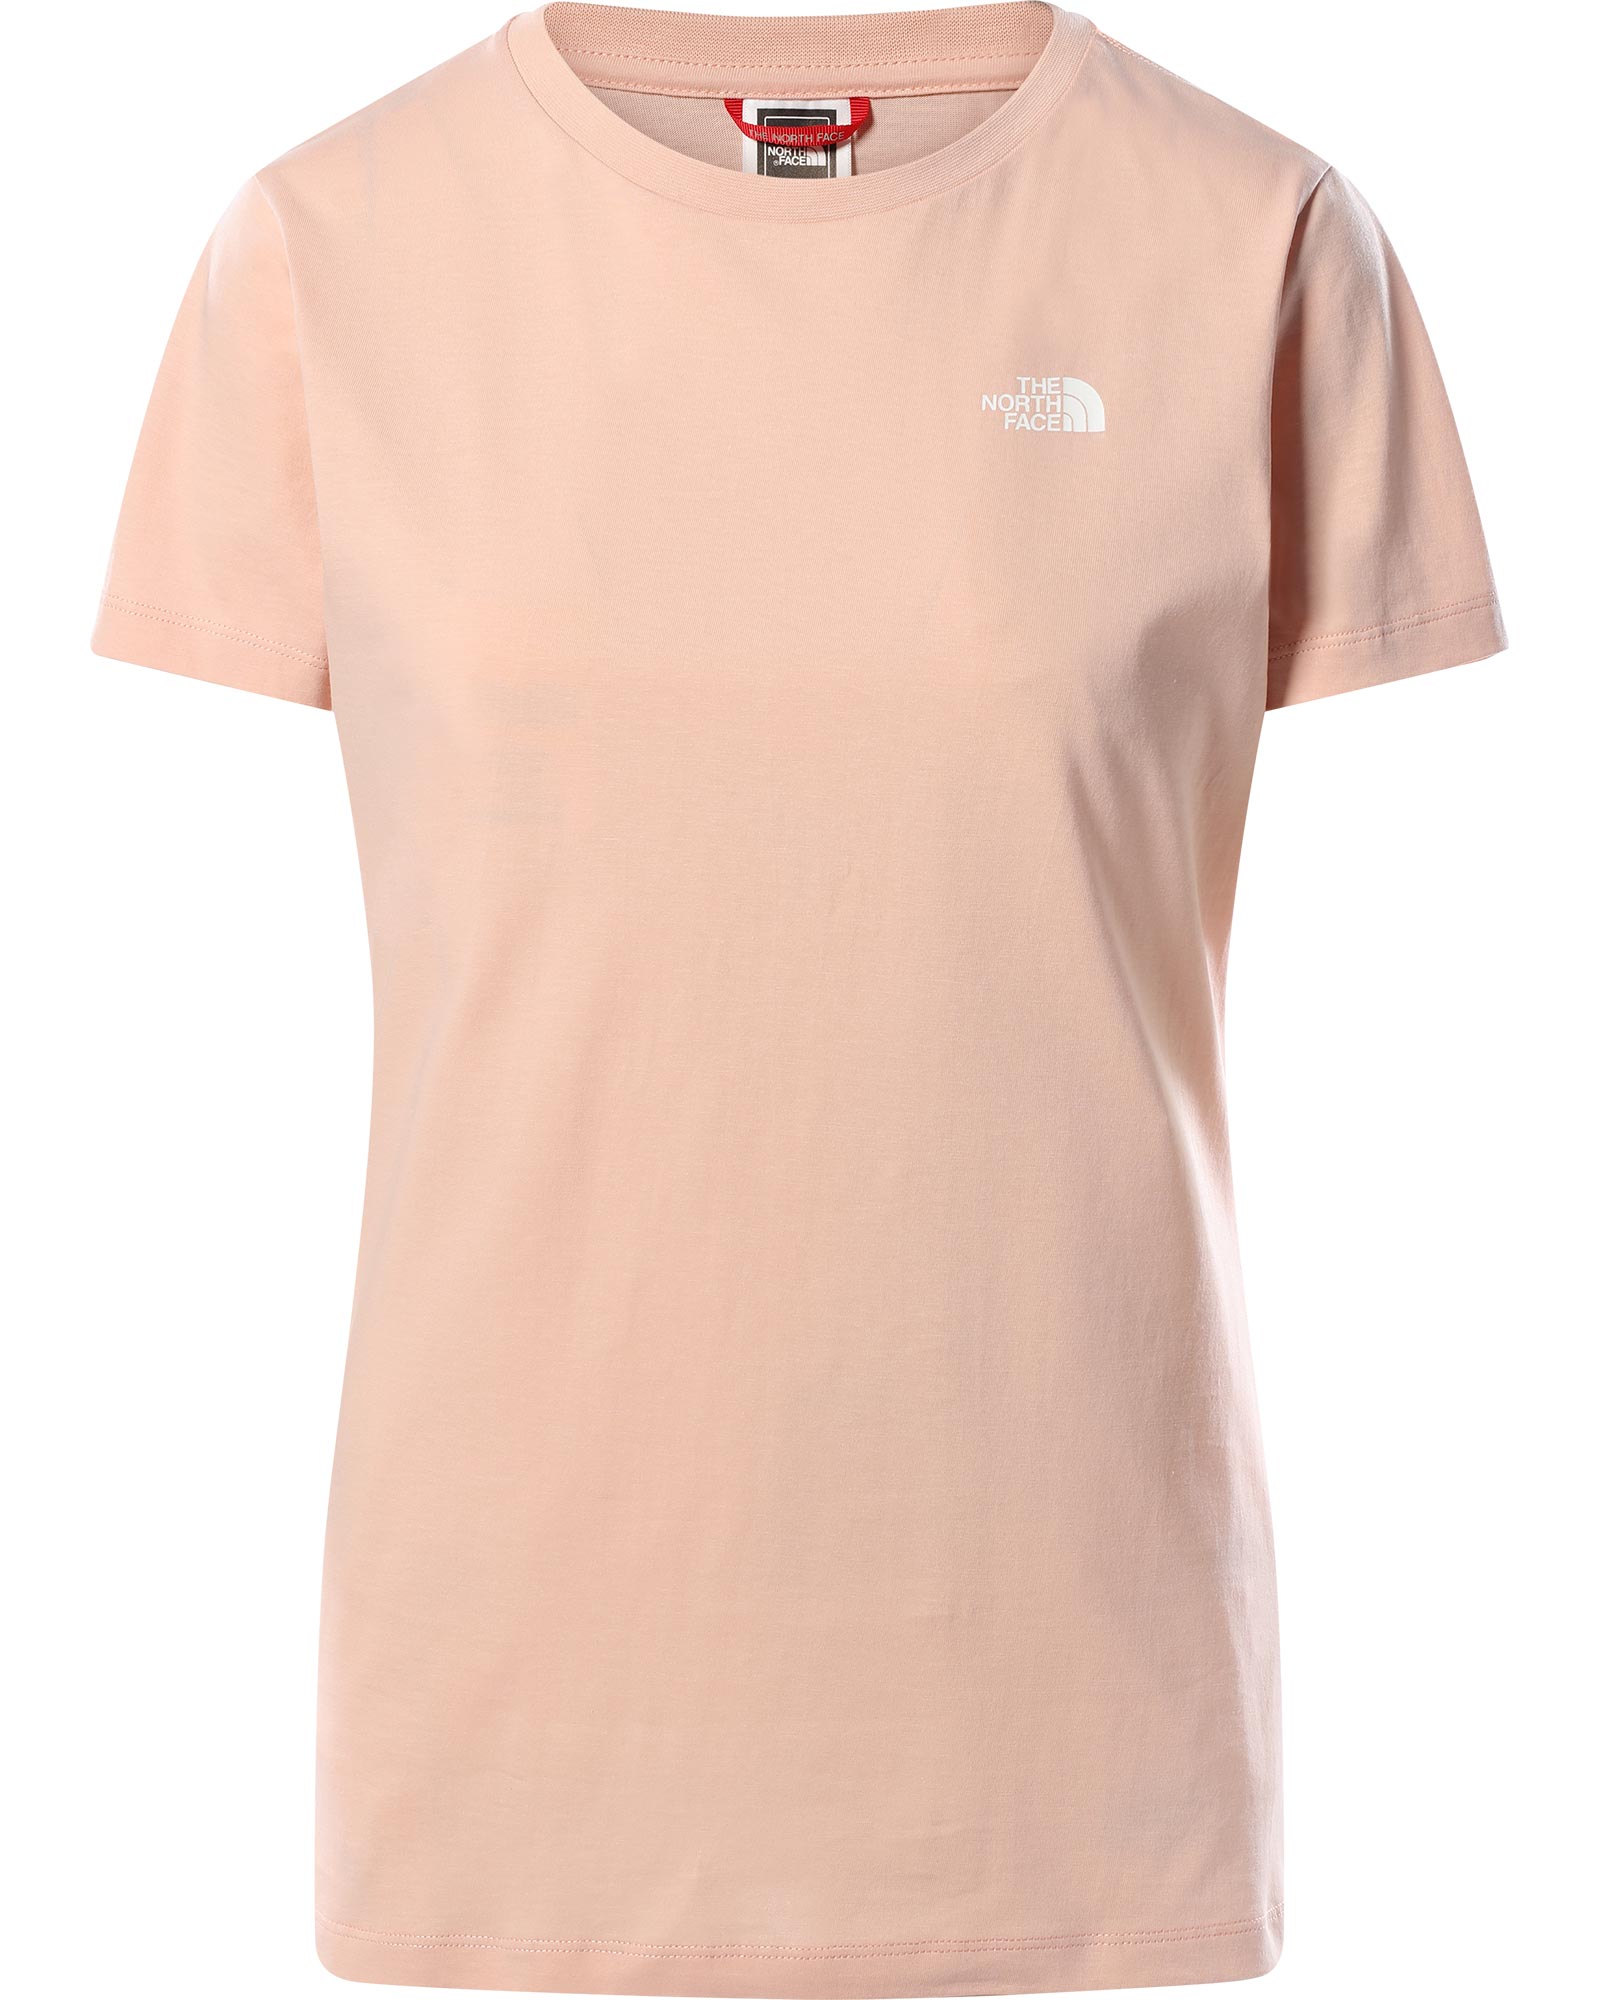 The North Face Simple Dome Women’s T Shirt - Evening Sand Pink S